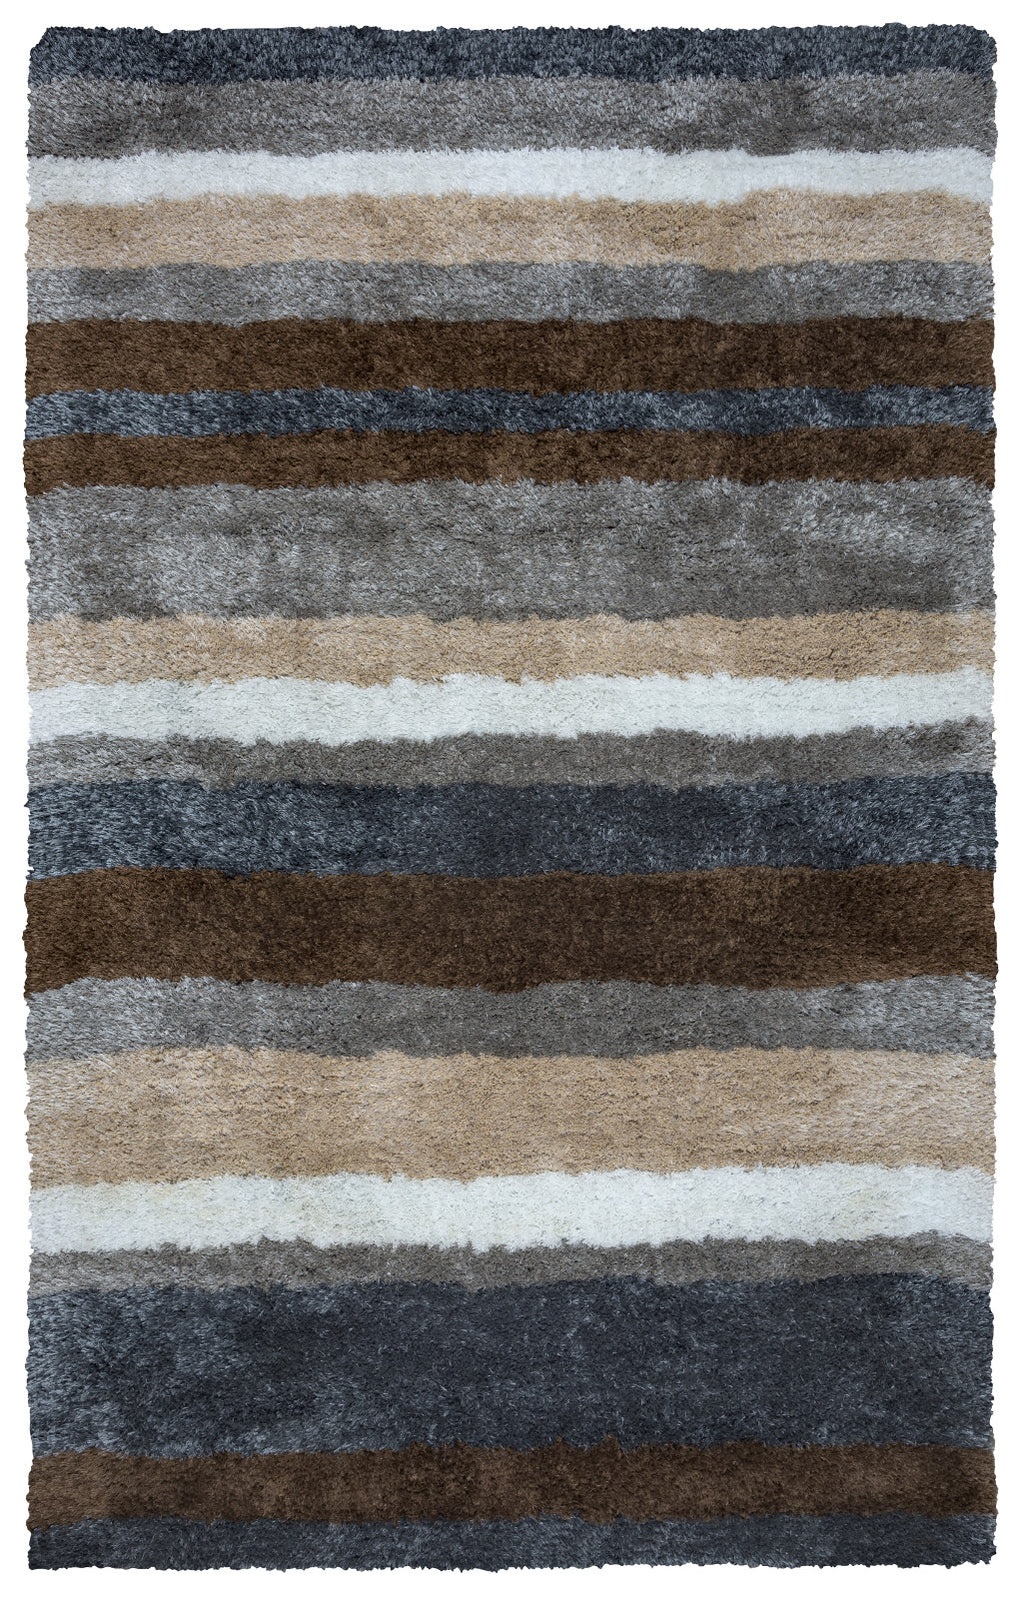 Rizzy Commons CO8423 Multi Area Rug